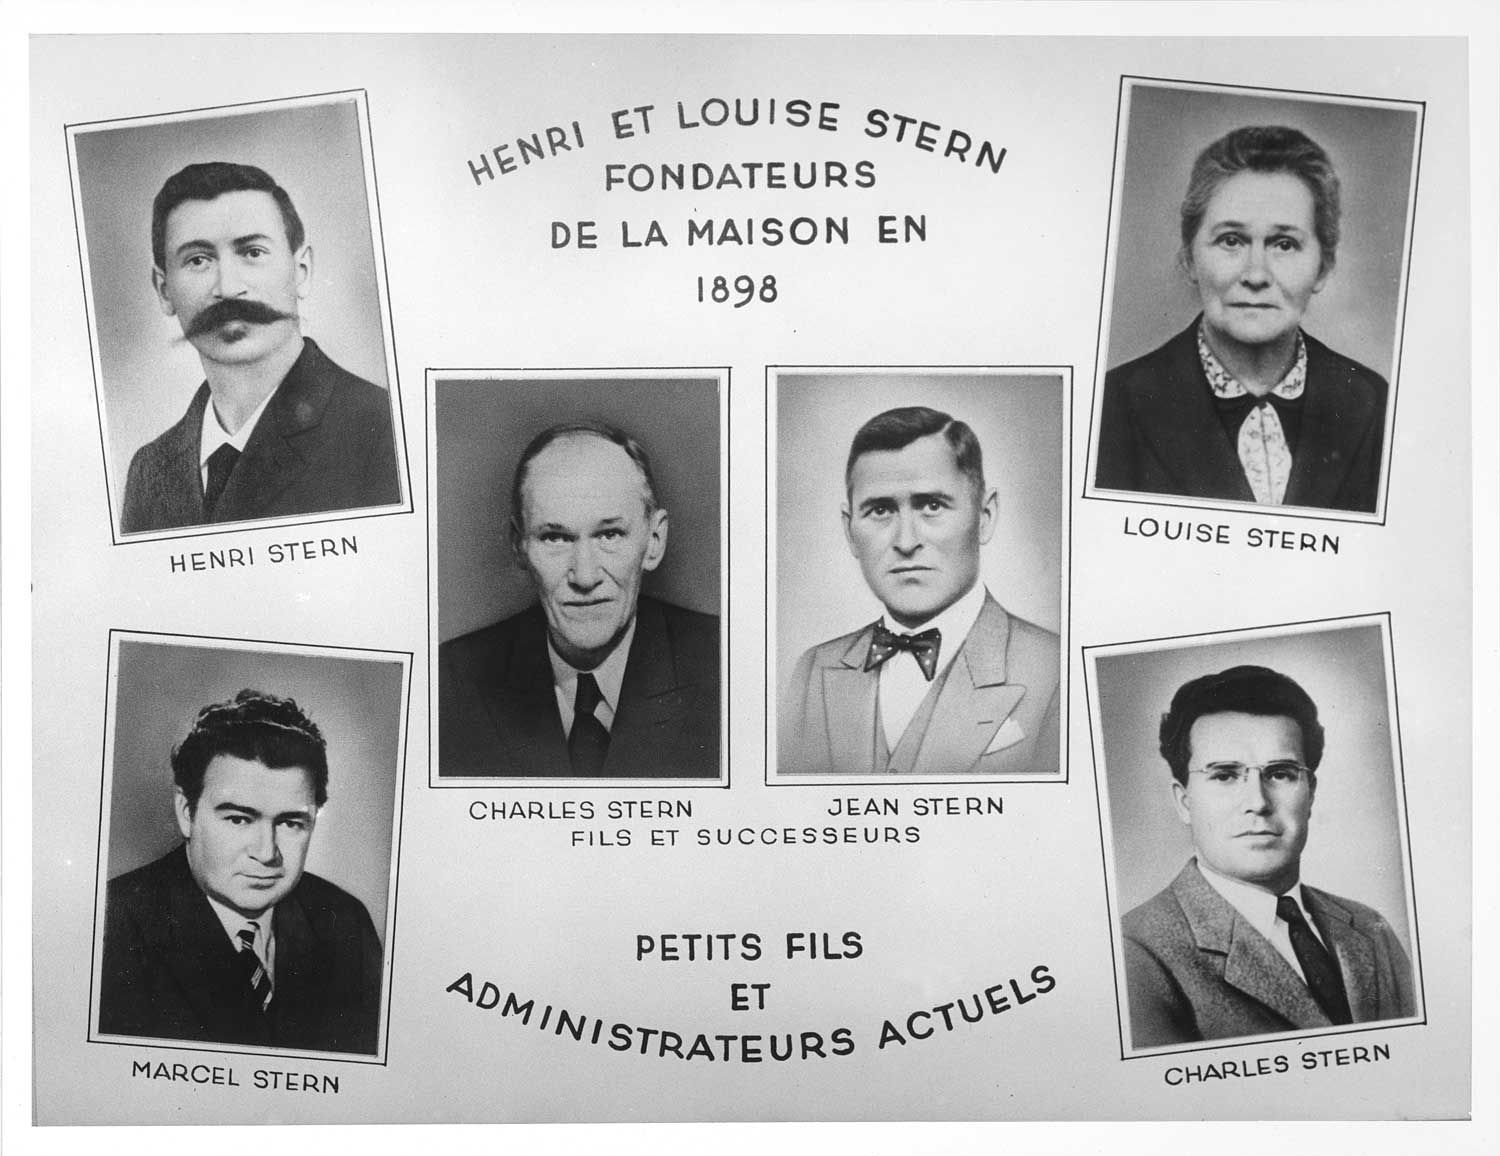 Patek Philippe was acquired by the Stern Family and run by brothers Charles and Jean Stern in 1932.